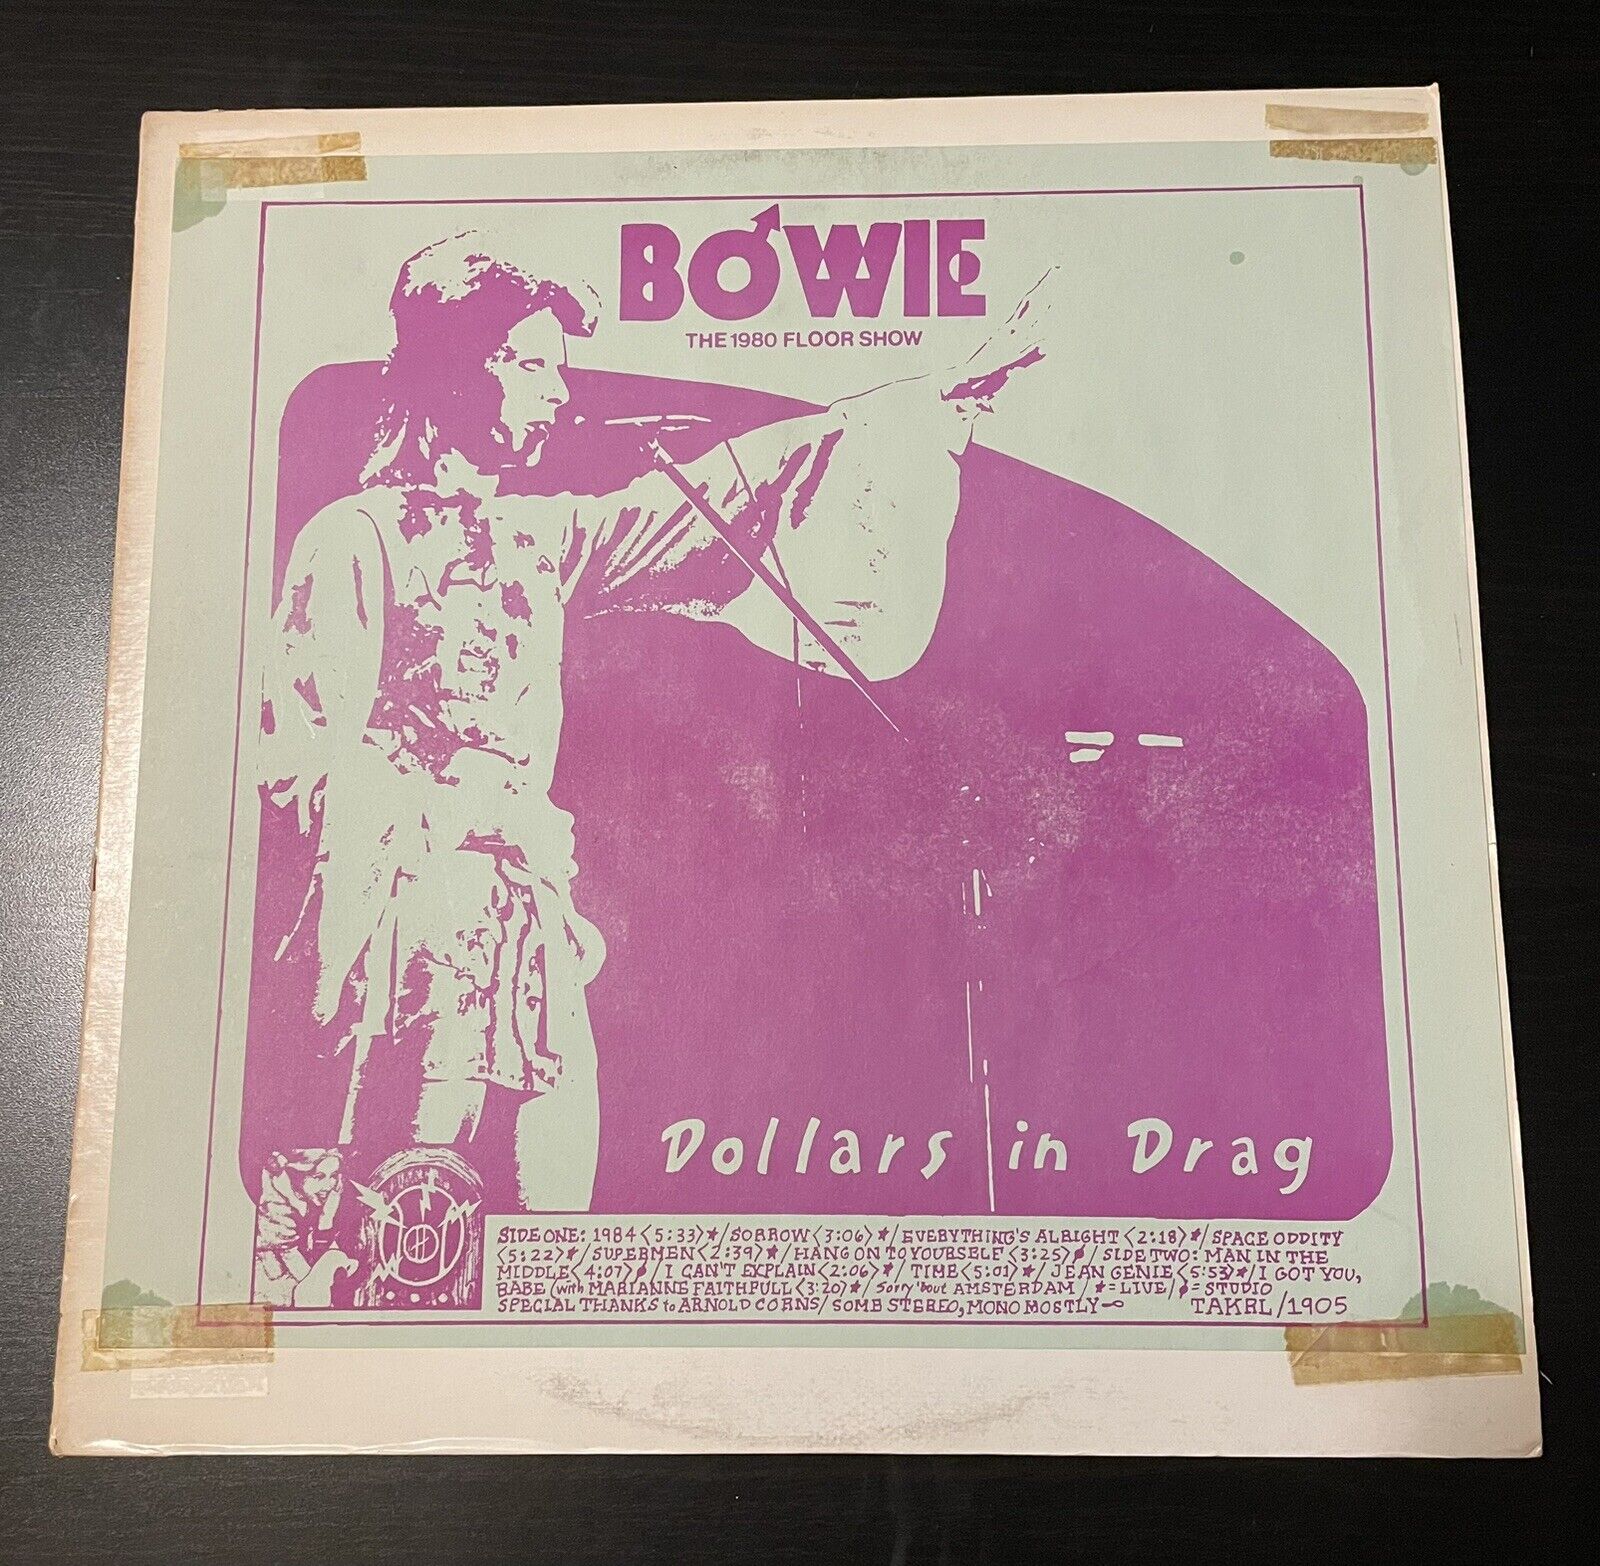 David Bowie - The 1980 Floor Show - Dollars In Drag - Green w/ Pink Taped Cover